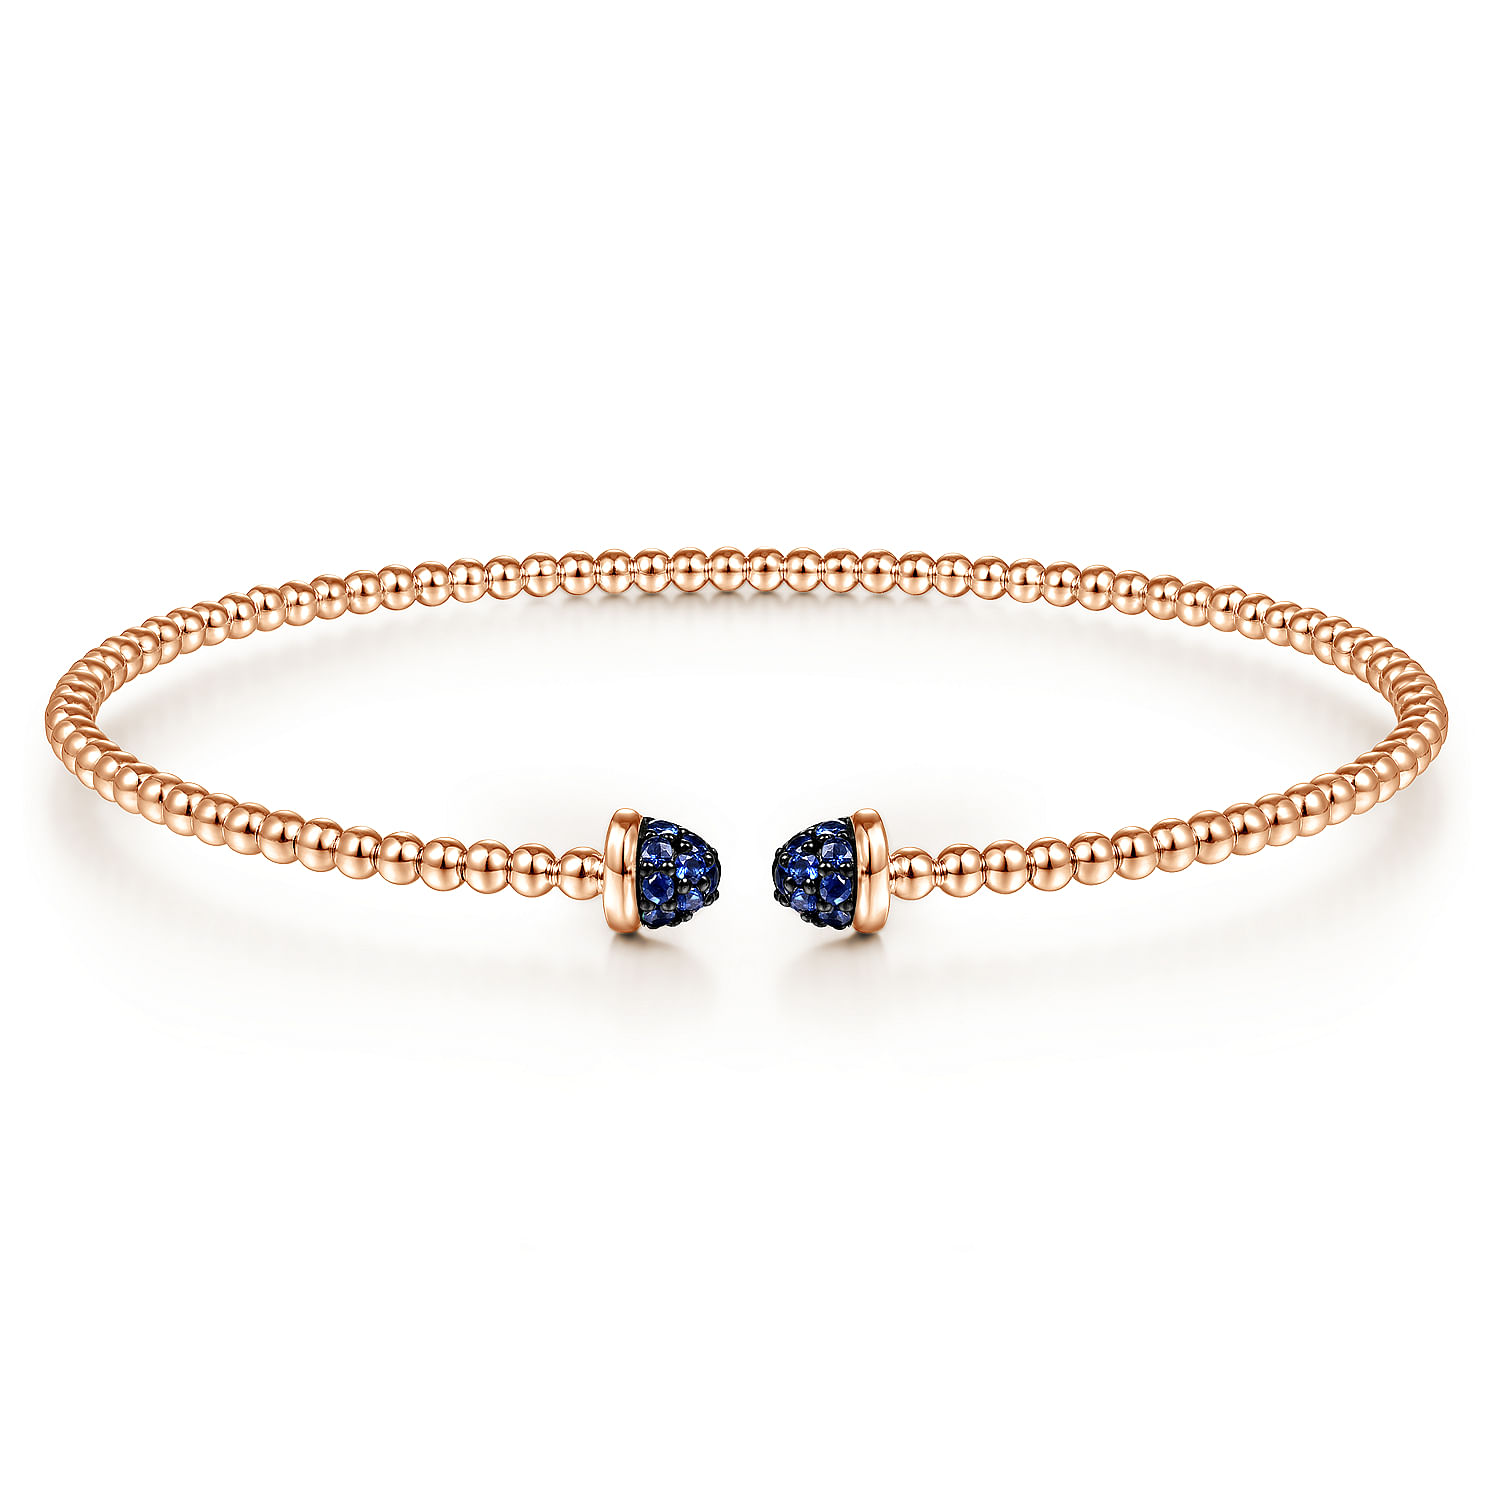 14K Rose Gold Bujukan Bead Cuff Bracelet with Sapphire Pave Caps